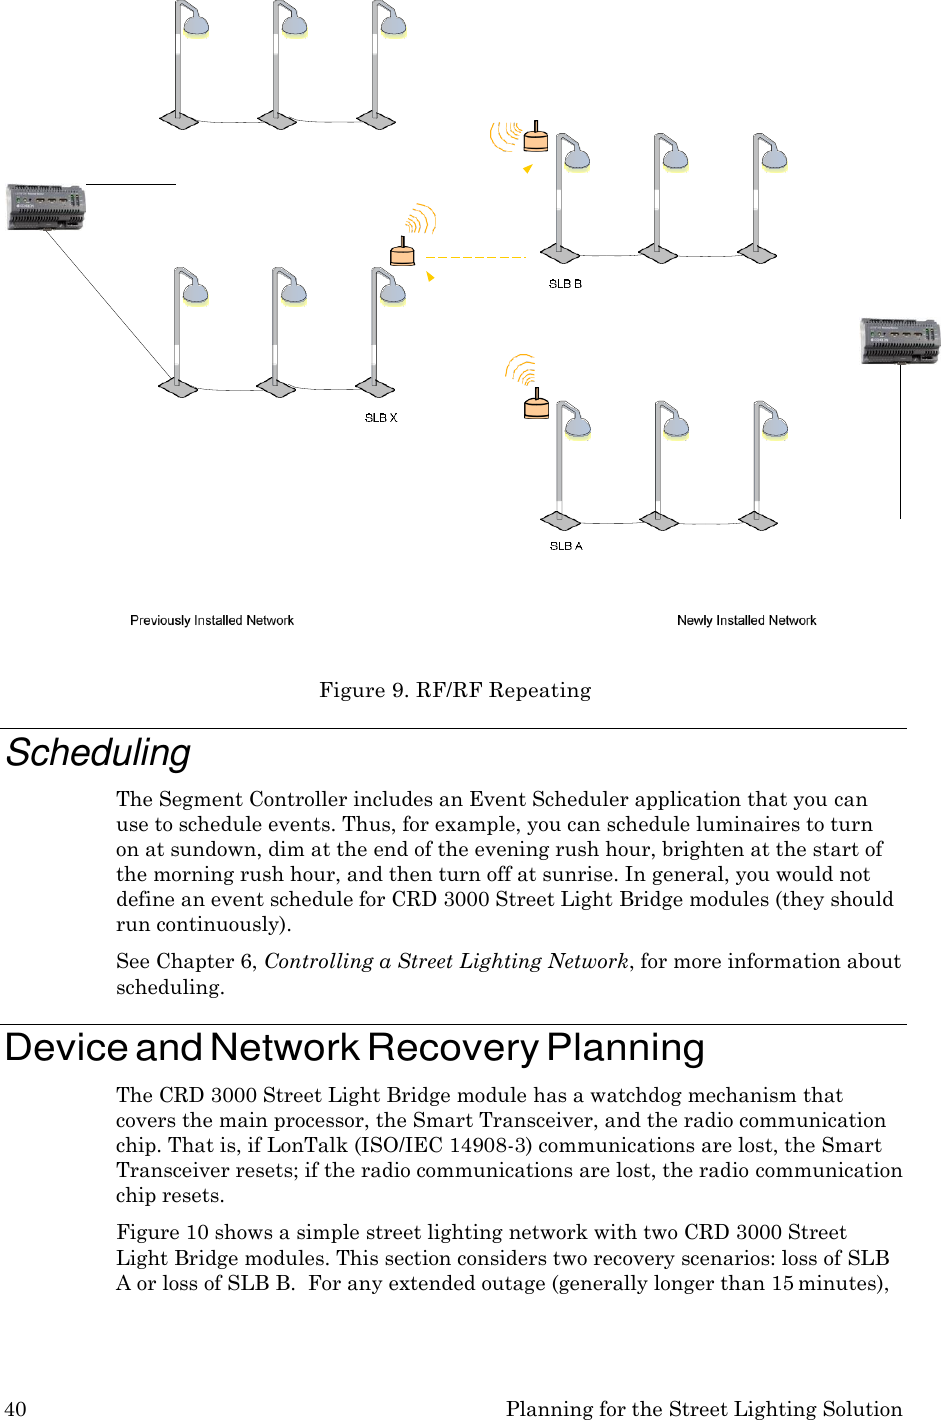 40 Planning for the Street Lighting Solution         Scheduling Figure 9. RF/RF Repeating The Segment Controller includes an Event Scheduler application that you can use to schedule events. Thus, for example, you can schedule luminaires to turn on at sundown, dim at the end of the evening rush hour, brighten at the start of the morning rush hour, and then turn off at sunrise. In general, you would not define an event schedule for CRD 3000 Street Light Bridge modules (they should run continuously). See Chapter 6, Controlling a Street Lighting Network, for more information about scheduling.  Device and Network Recovery Planning The CRD 3000 Street Light Bridge module has a watchdog mechanism that covers the main processor, the Smart Transceiver, and the radio communication chip. That is, if LonTalk (ISO/IEC 14908-3) communications are lost, the Smart Transceiver resets; if the radio communications are lost, the radio communication chip resets. Figure 10 shows a simple street lighting network with two CRD 3000 Street Light Bridge modules. This section considers two recovery scenarios: loss of SLB A or loss of SLB B.  For any extended outage (generally longer than 15 minutes), 